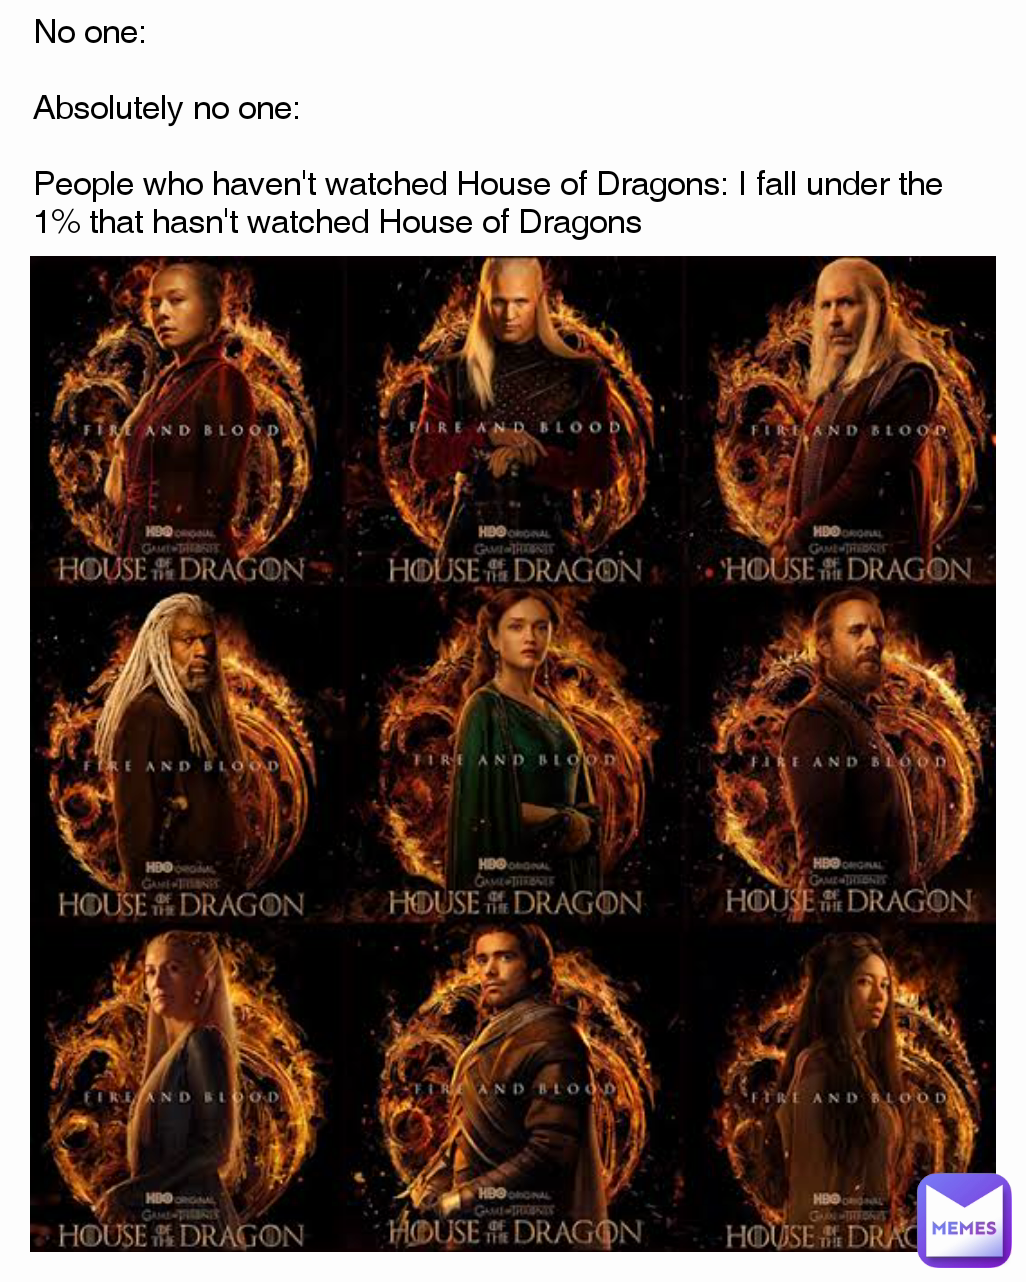 No one:

Absolutely no one:

People who haven't watched House of Dragons: I fall under the 1% that hasn't watched House of Dragons 